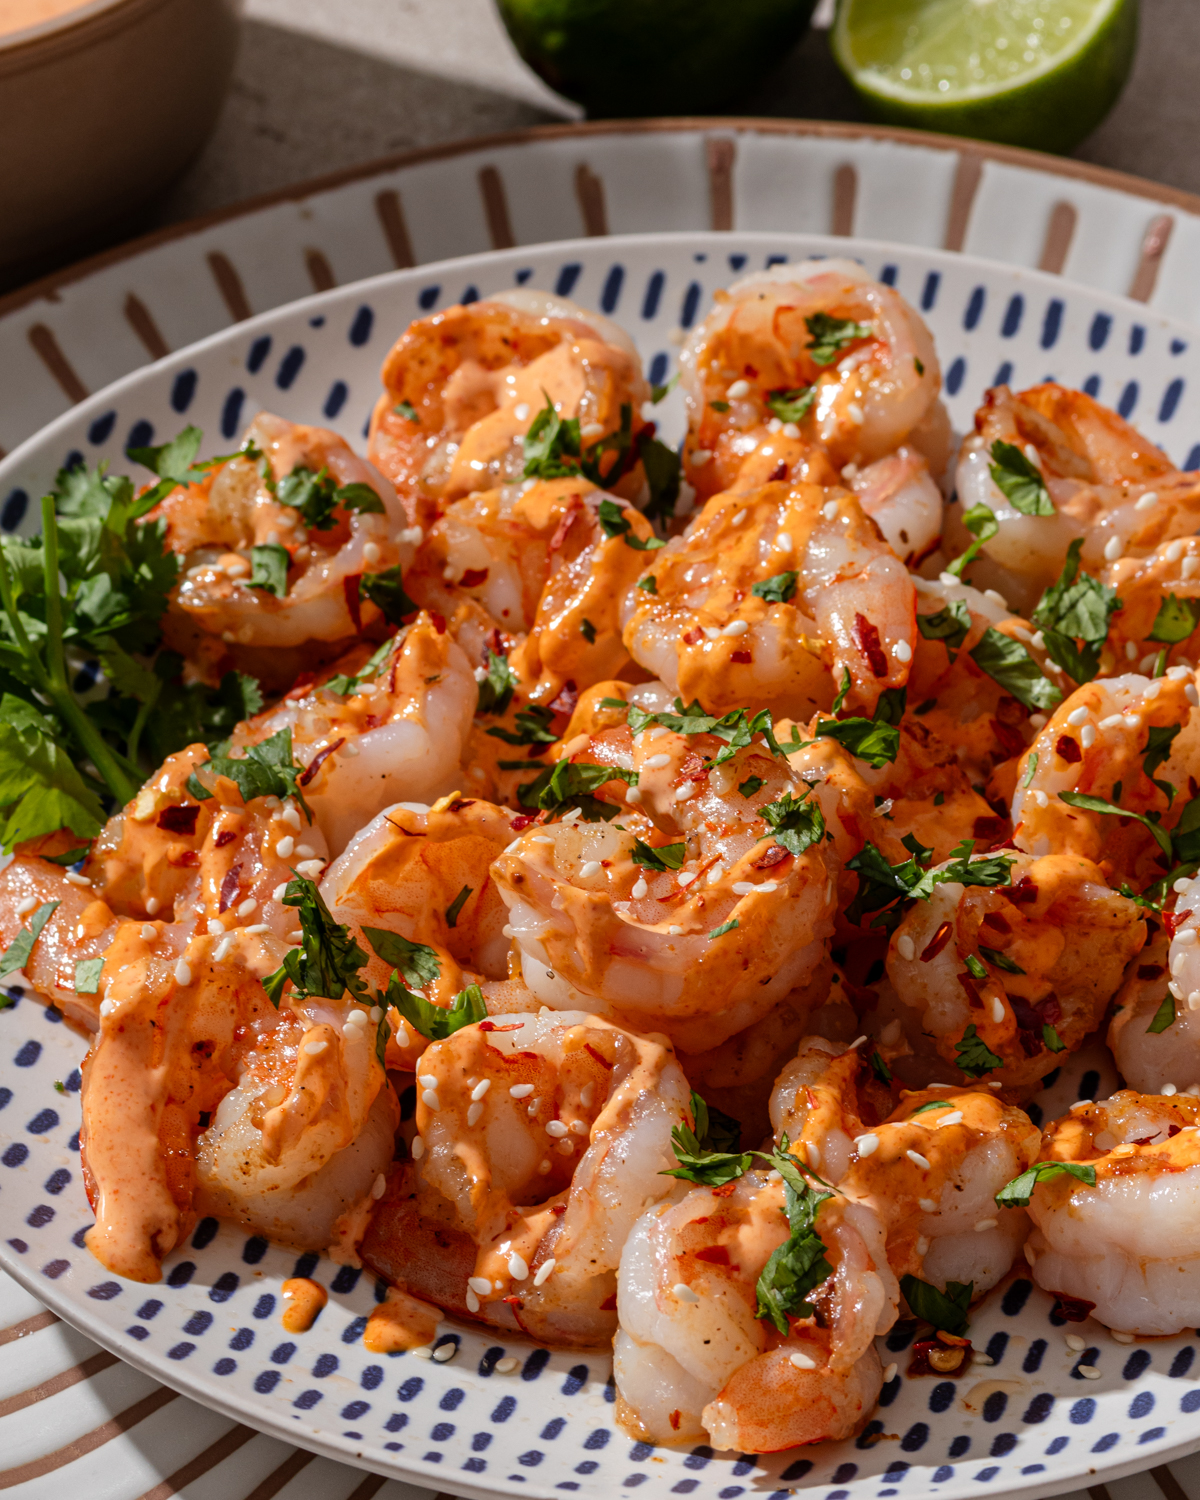 Spicy garlic shrimp on a patterned plate with sauce and toppings.